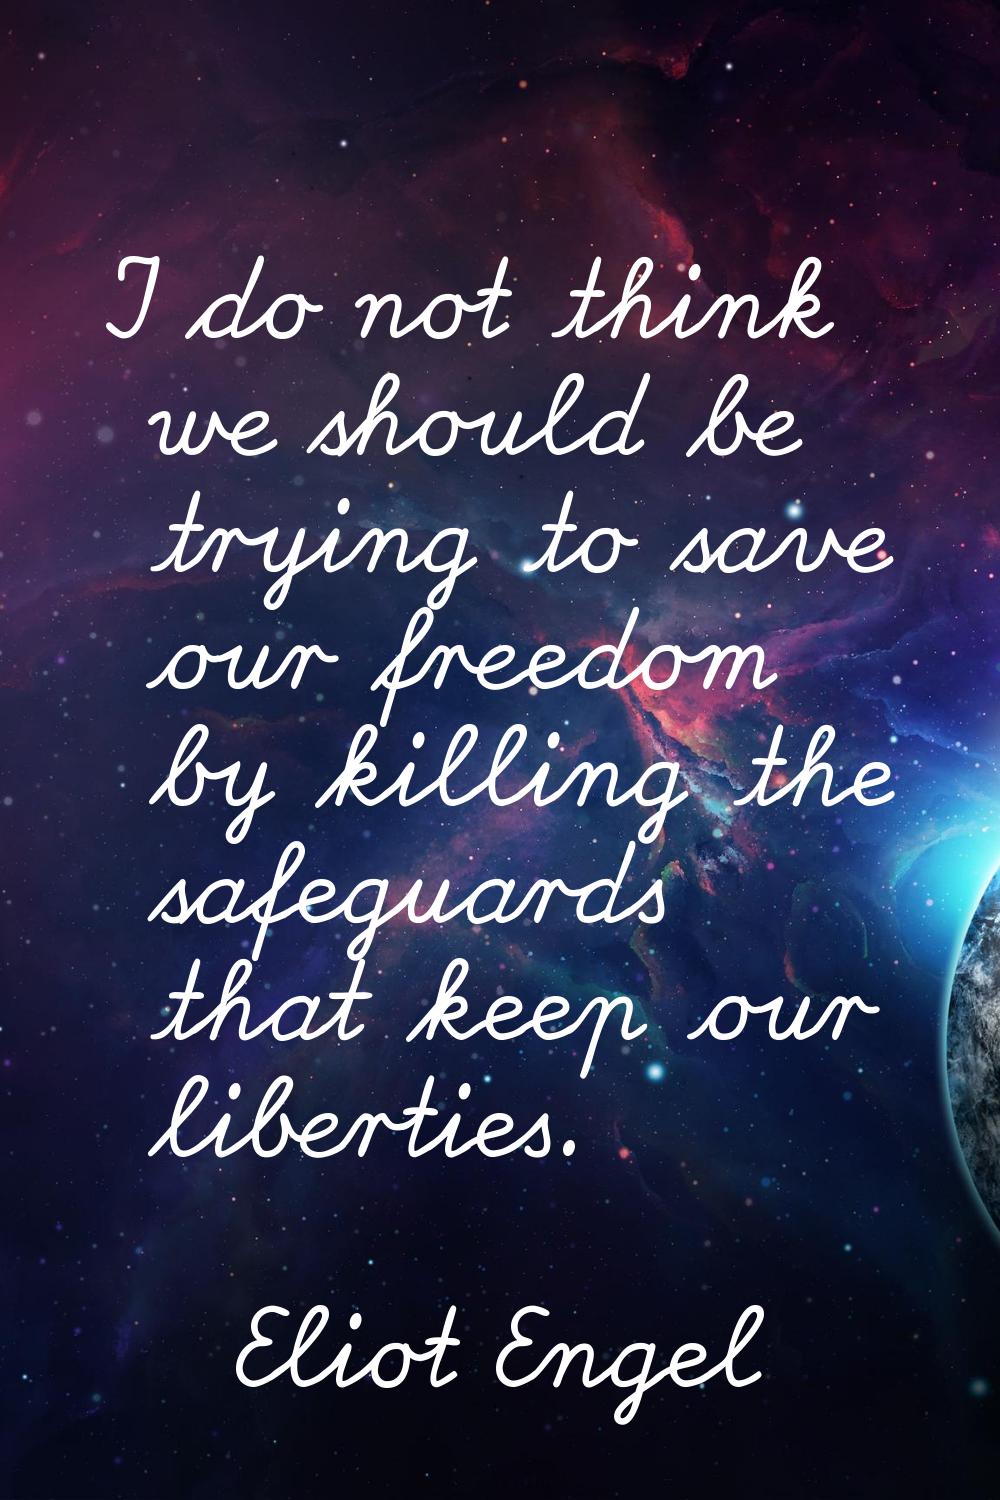 I do not think we should be trying to save our freedom by killing the safeguards that keep our libe